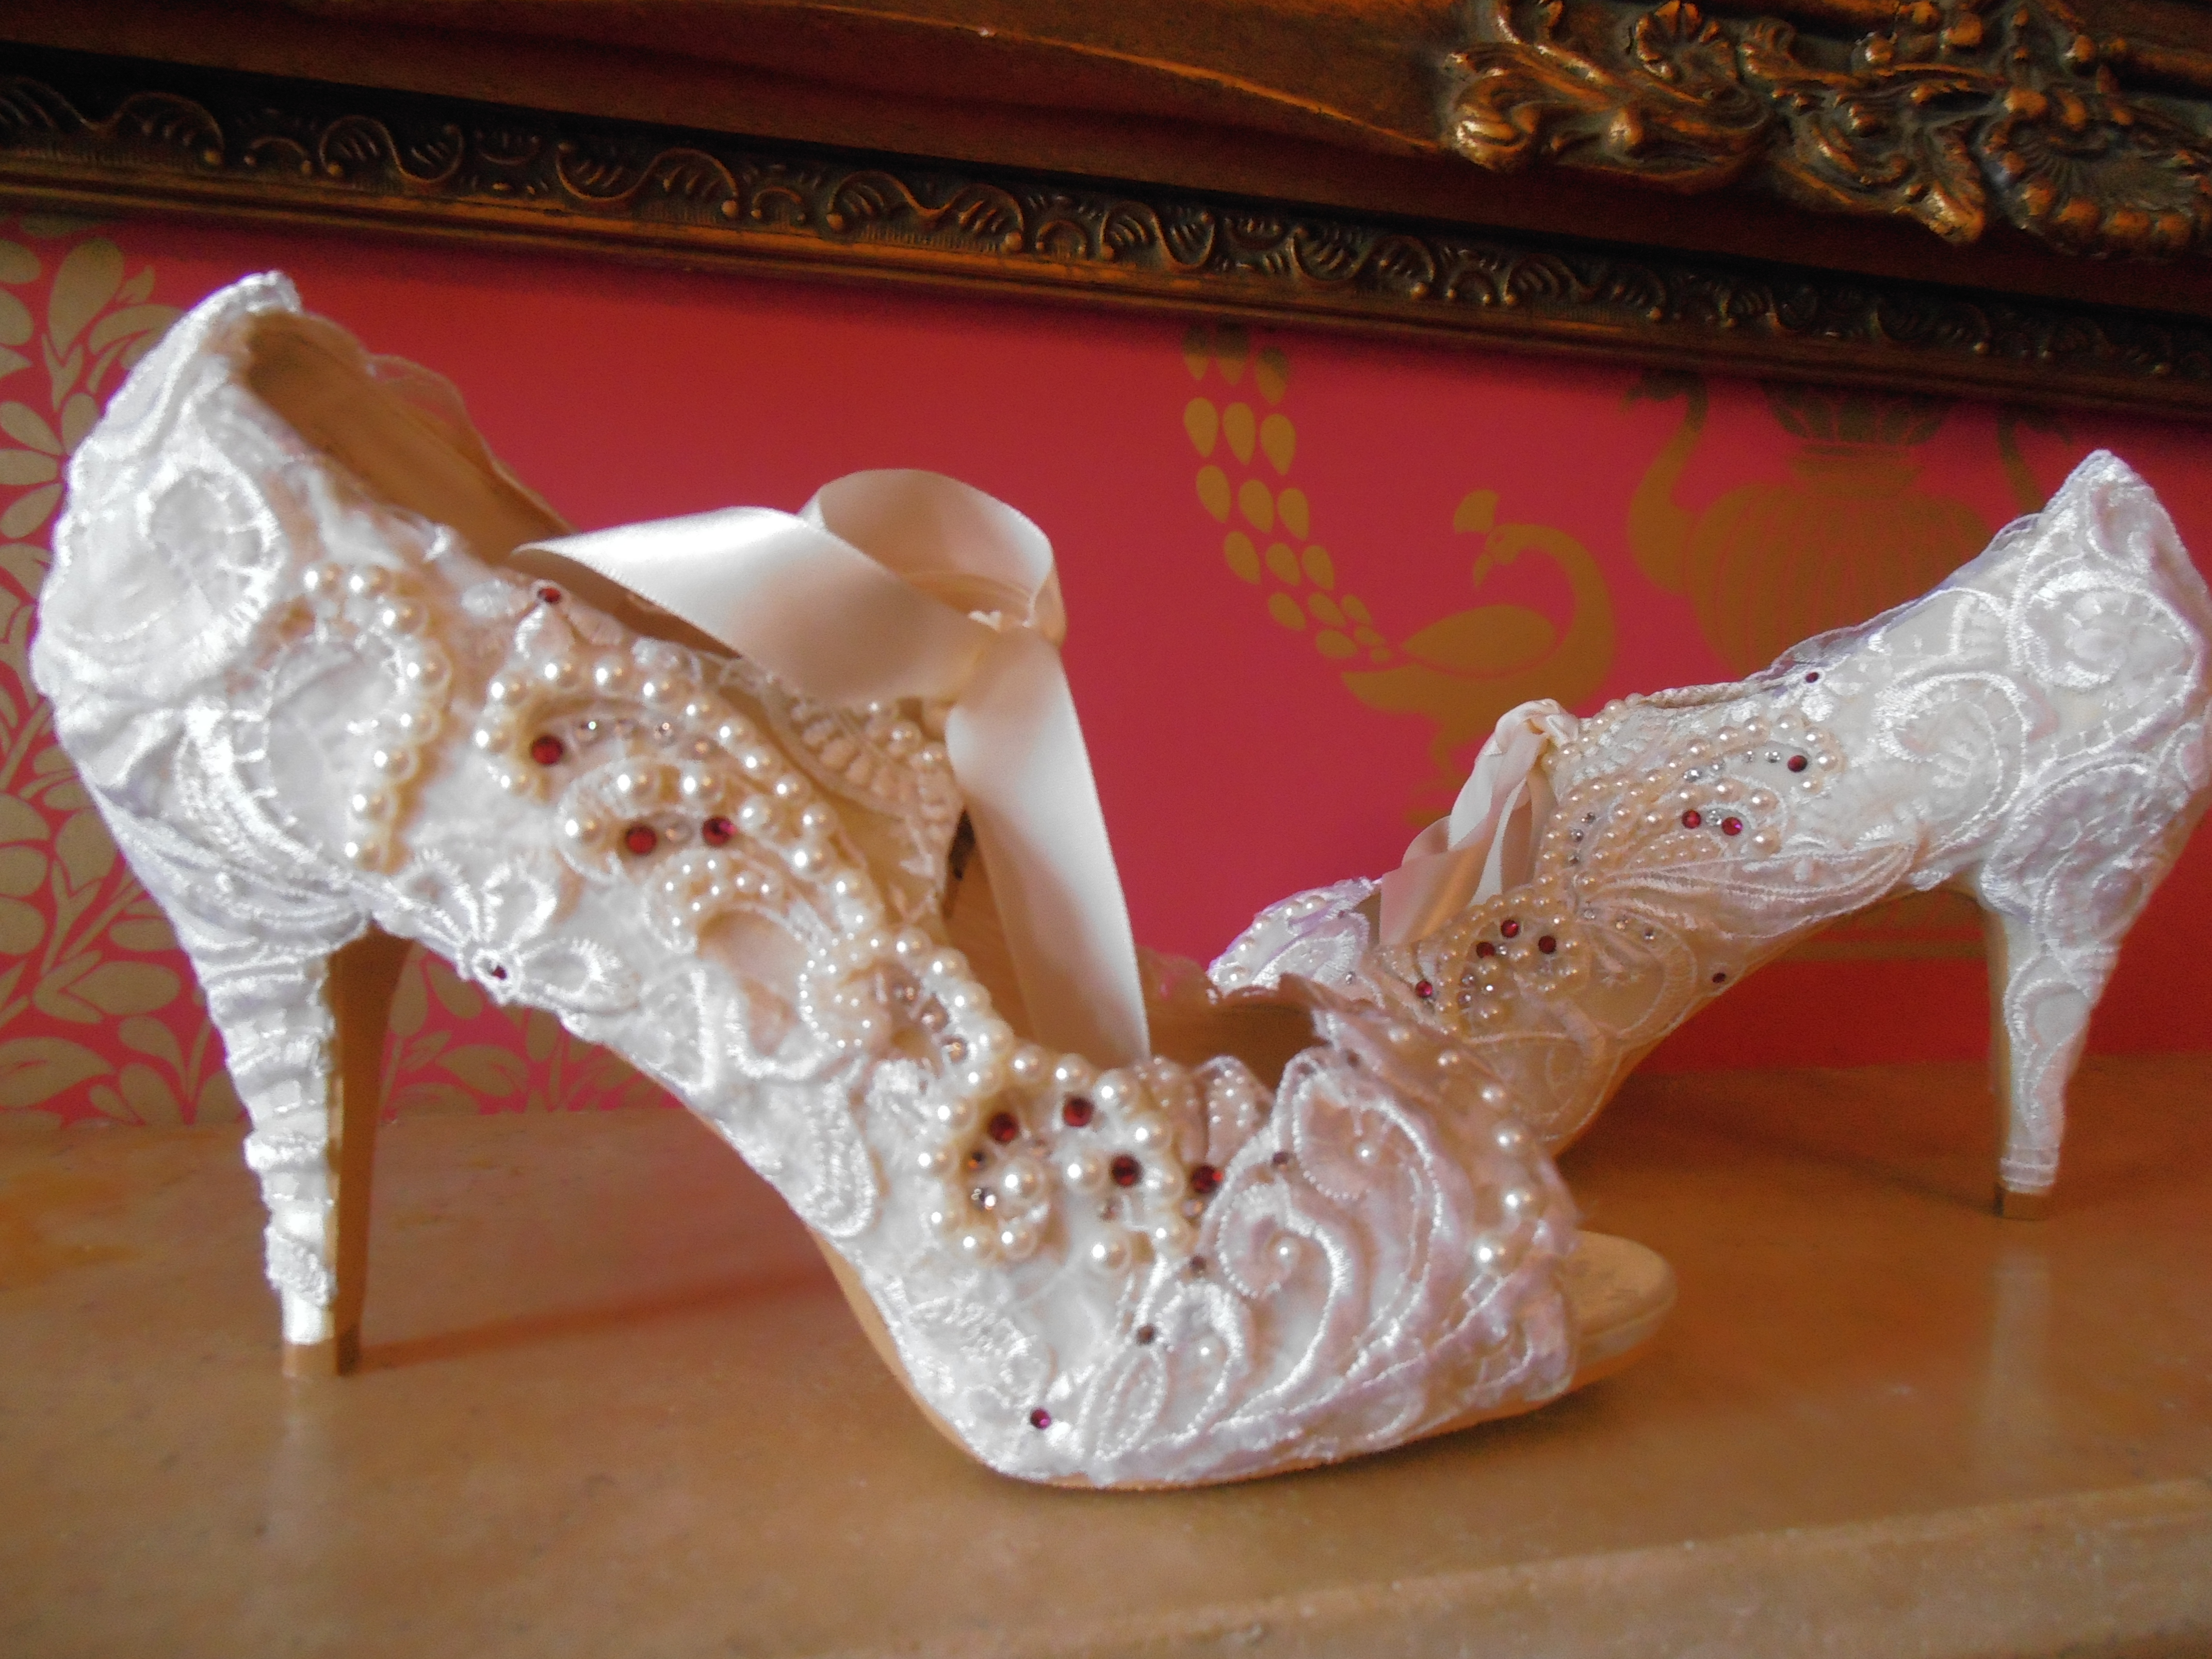 crystal lace bridal shoes